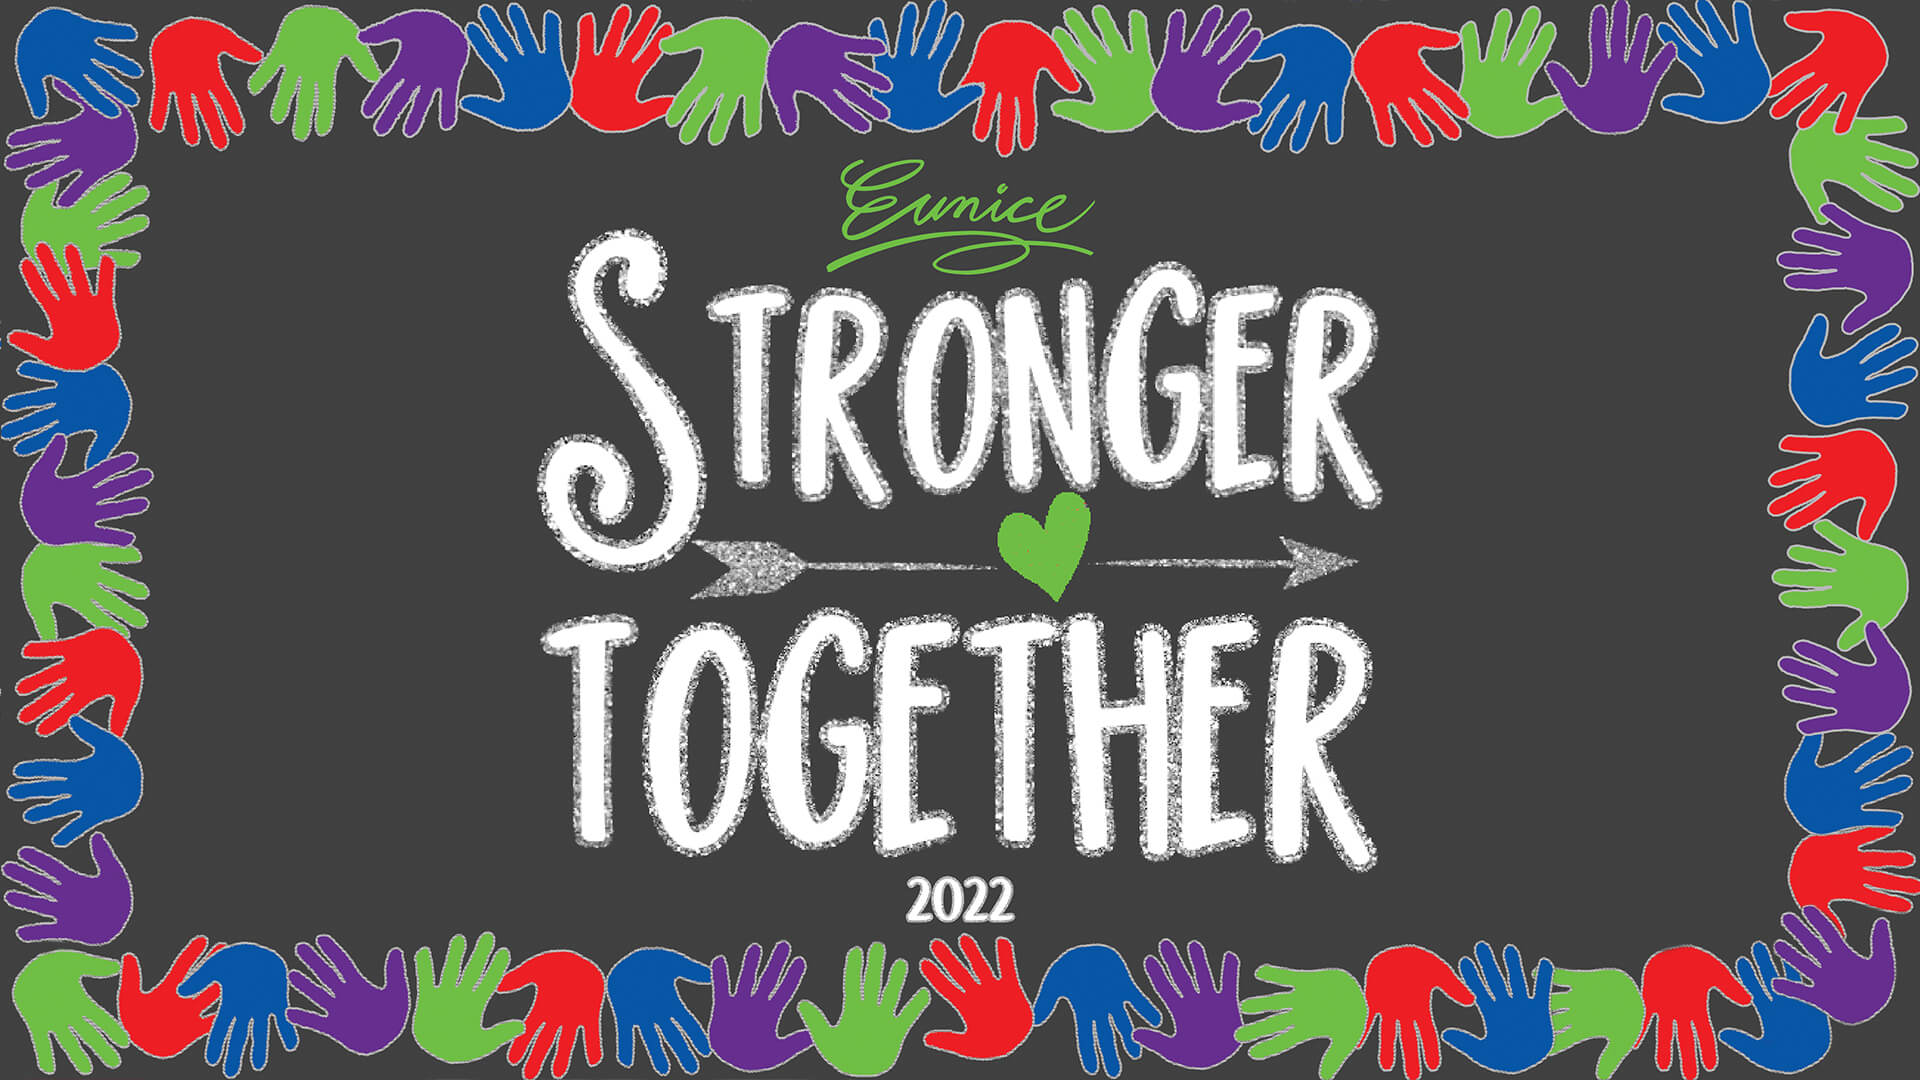 Eunice Primary School - Stonger Together 2022